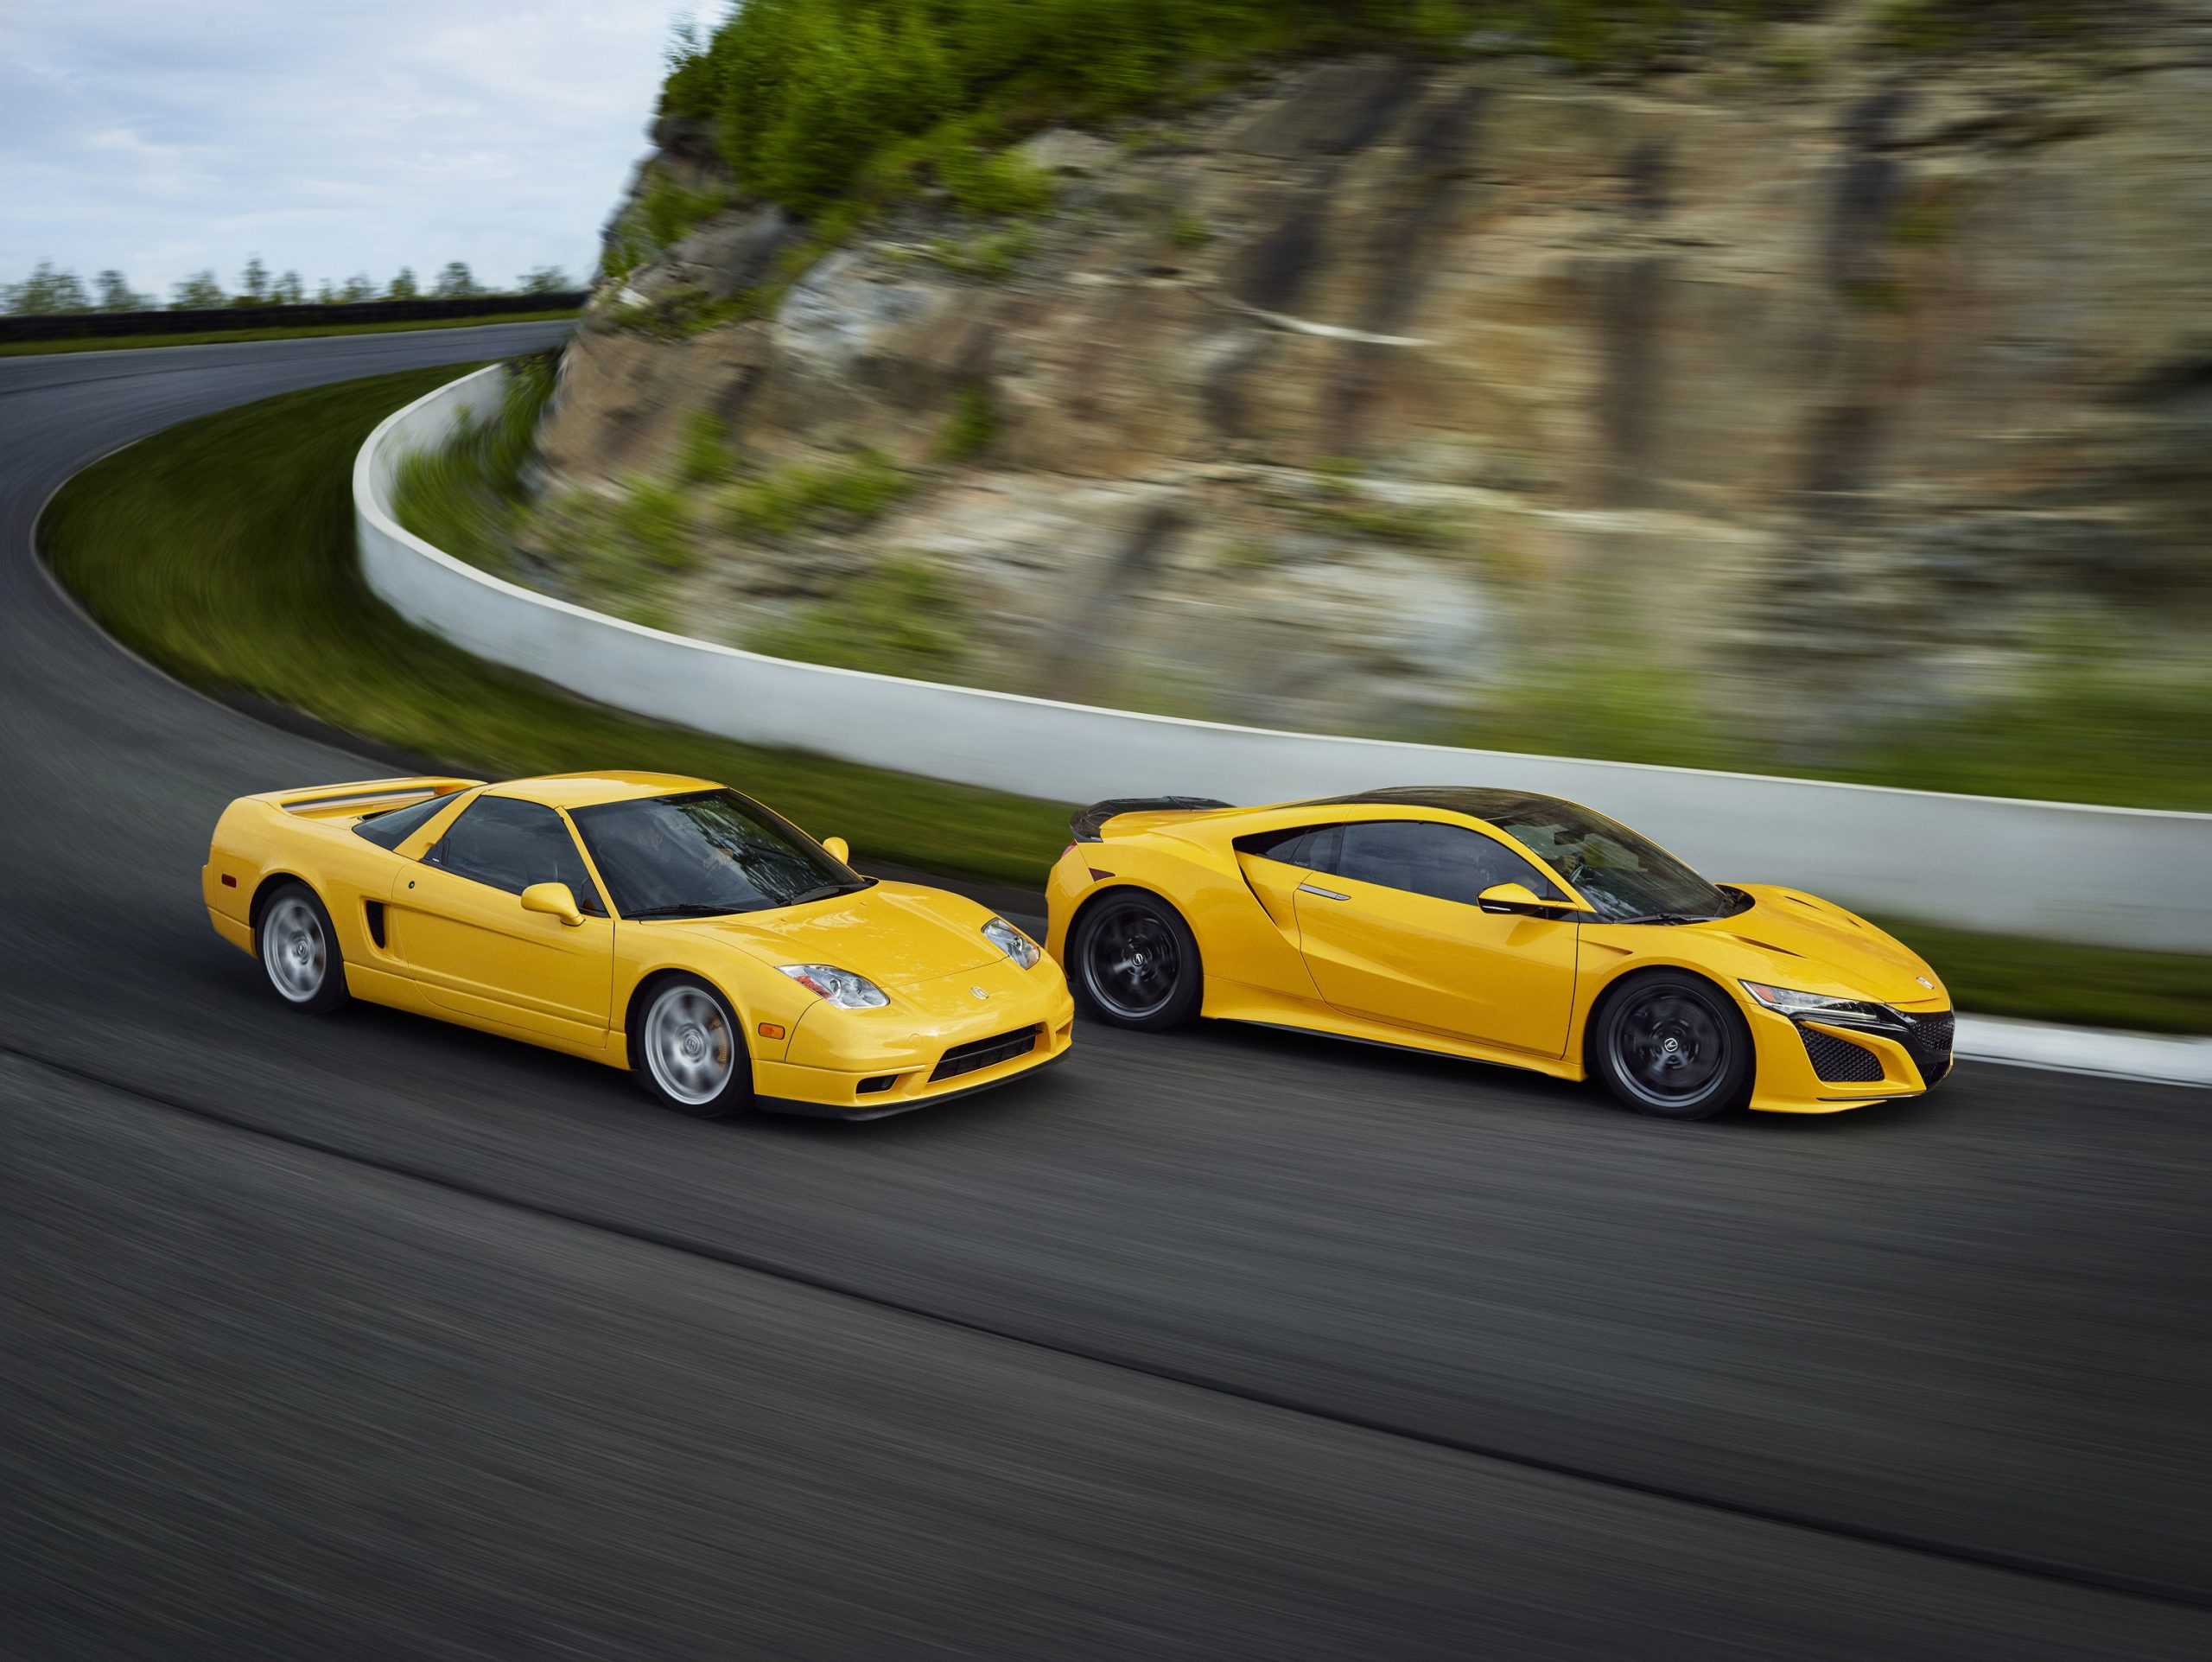 A pair of Spa Yellow Acura NSX sports cars shot in motion from the side